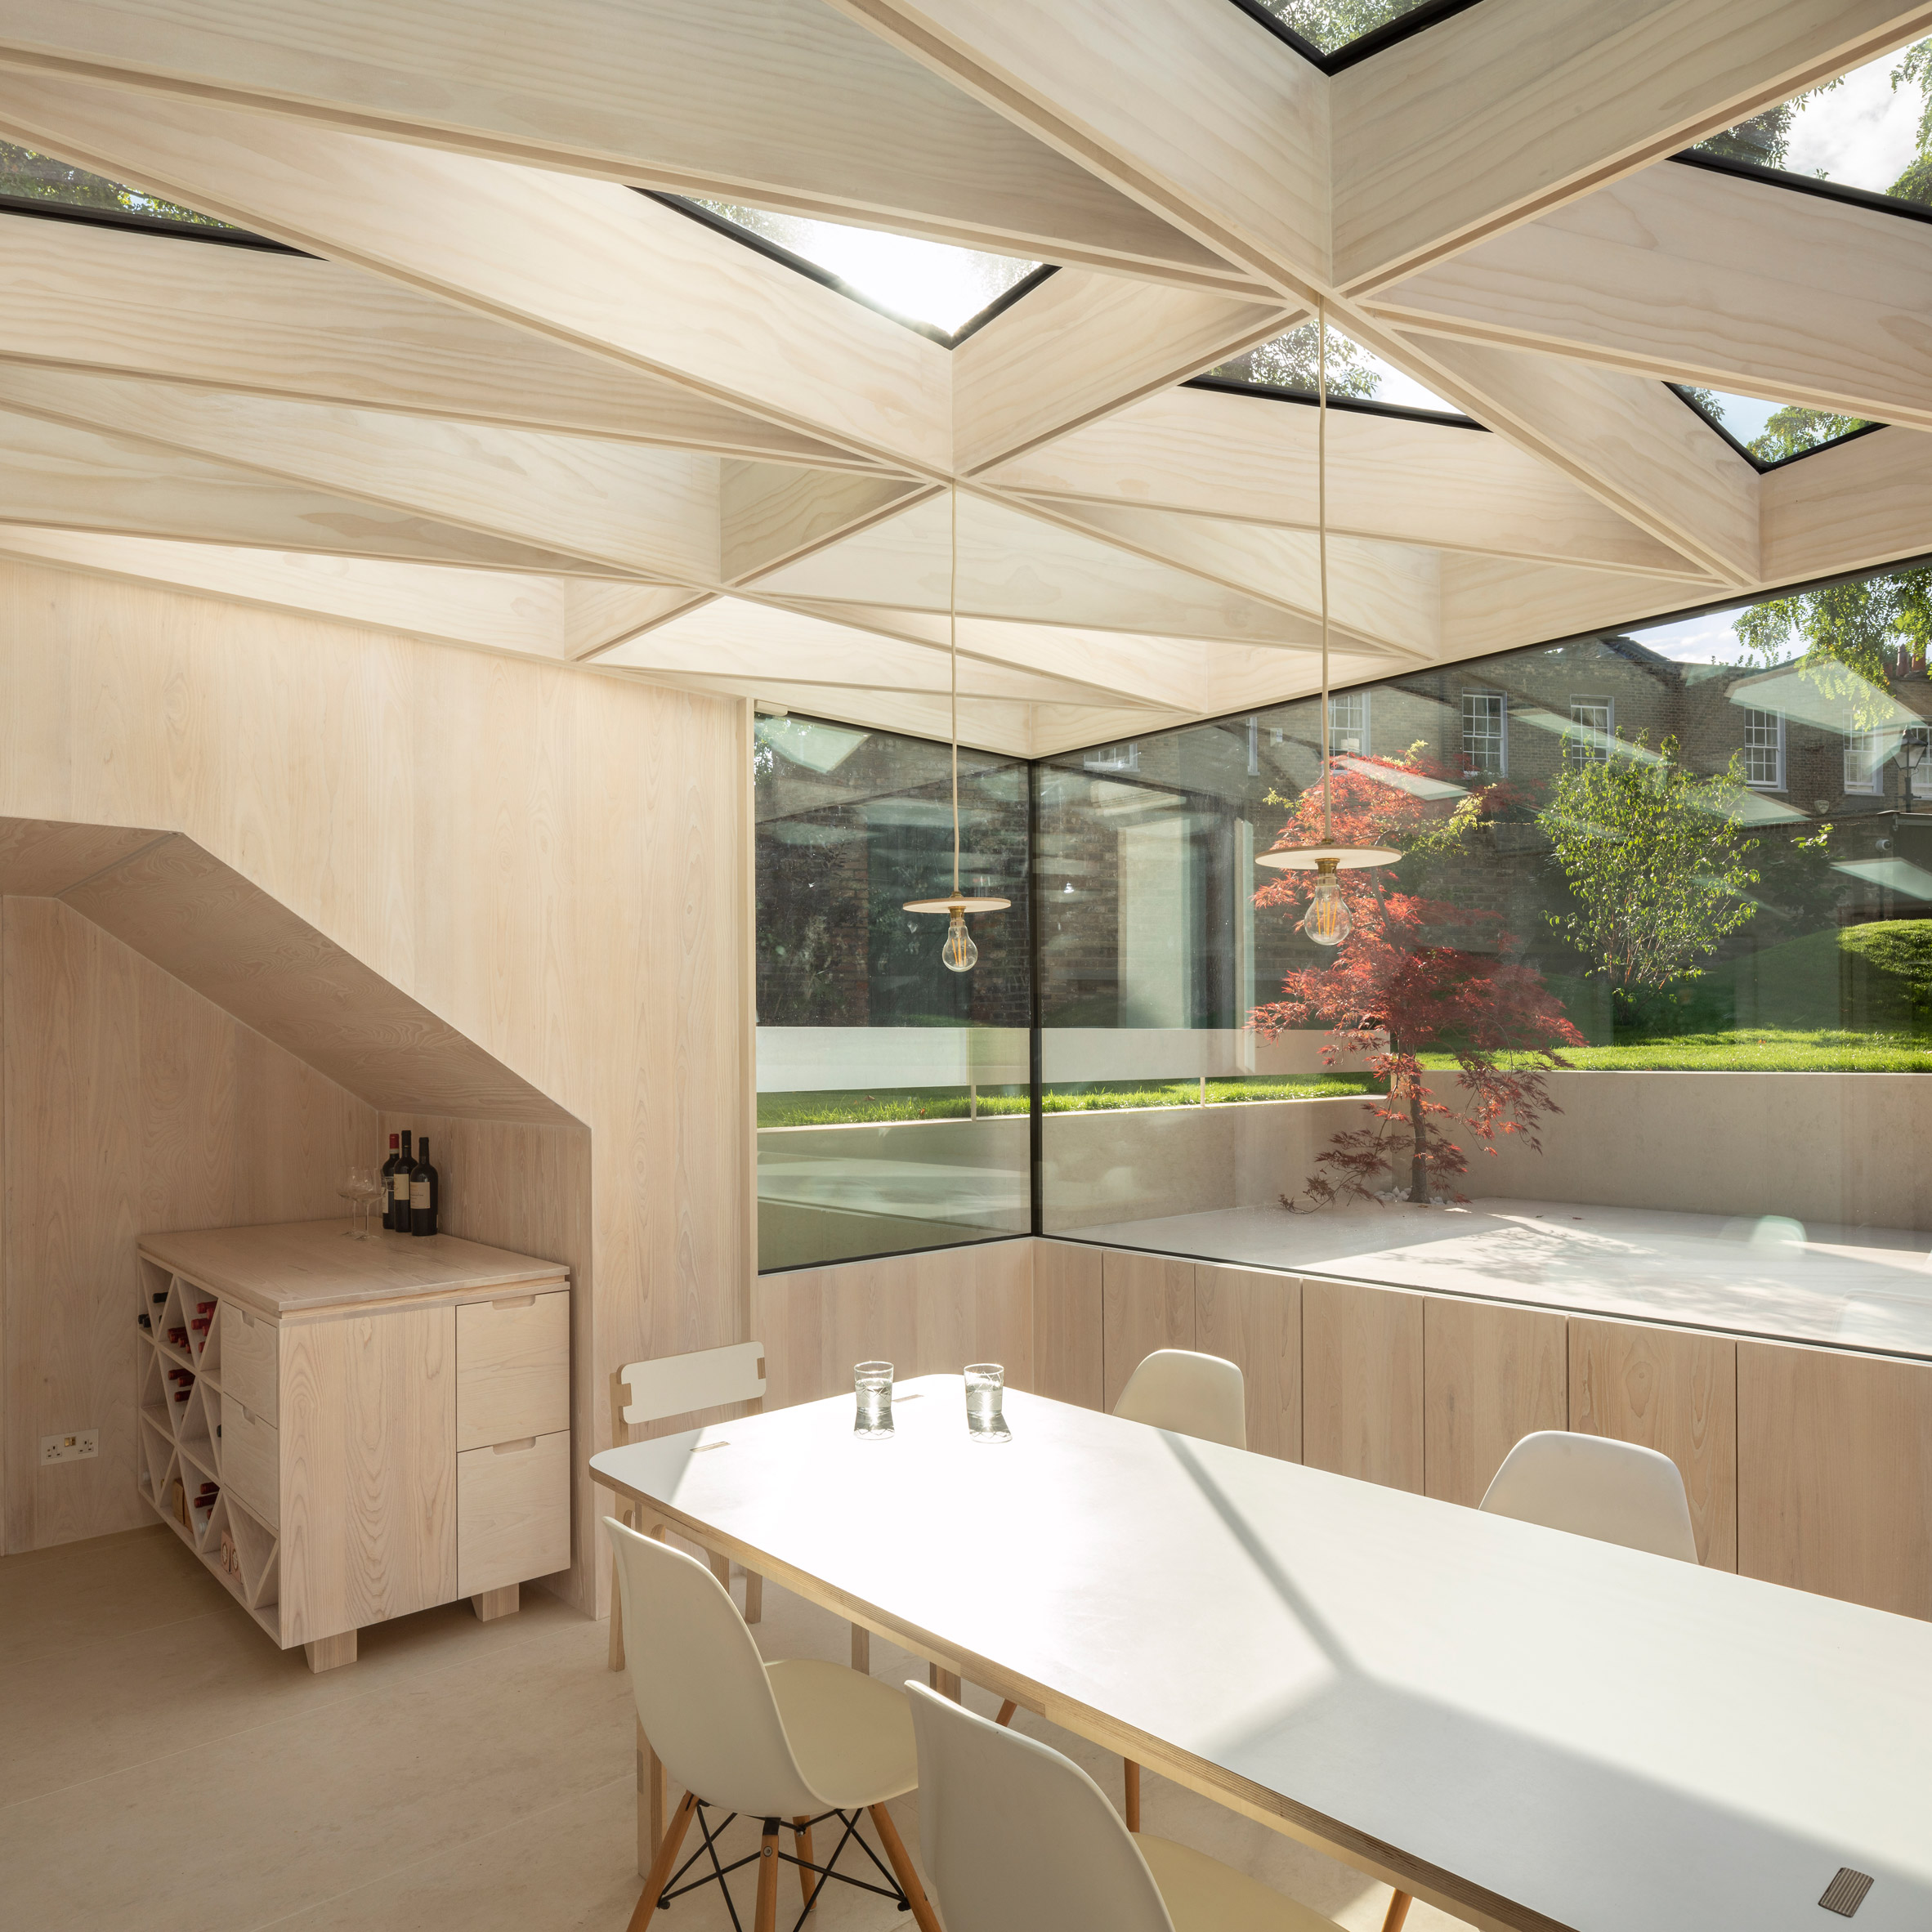 Wooden Roof by Tsurata Architects